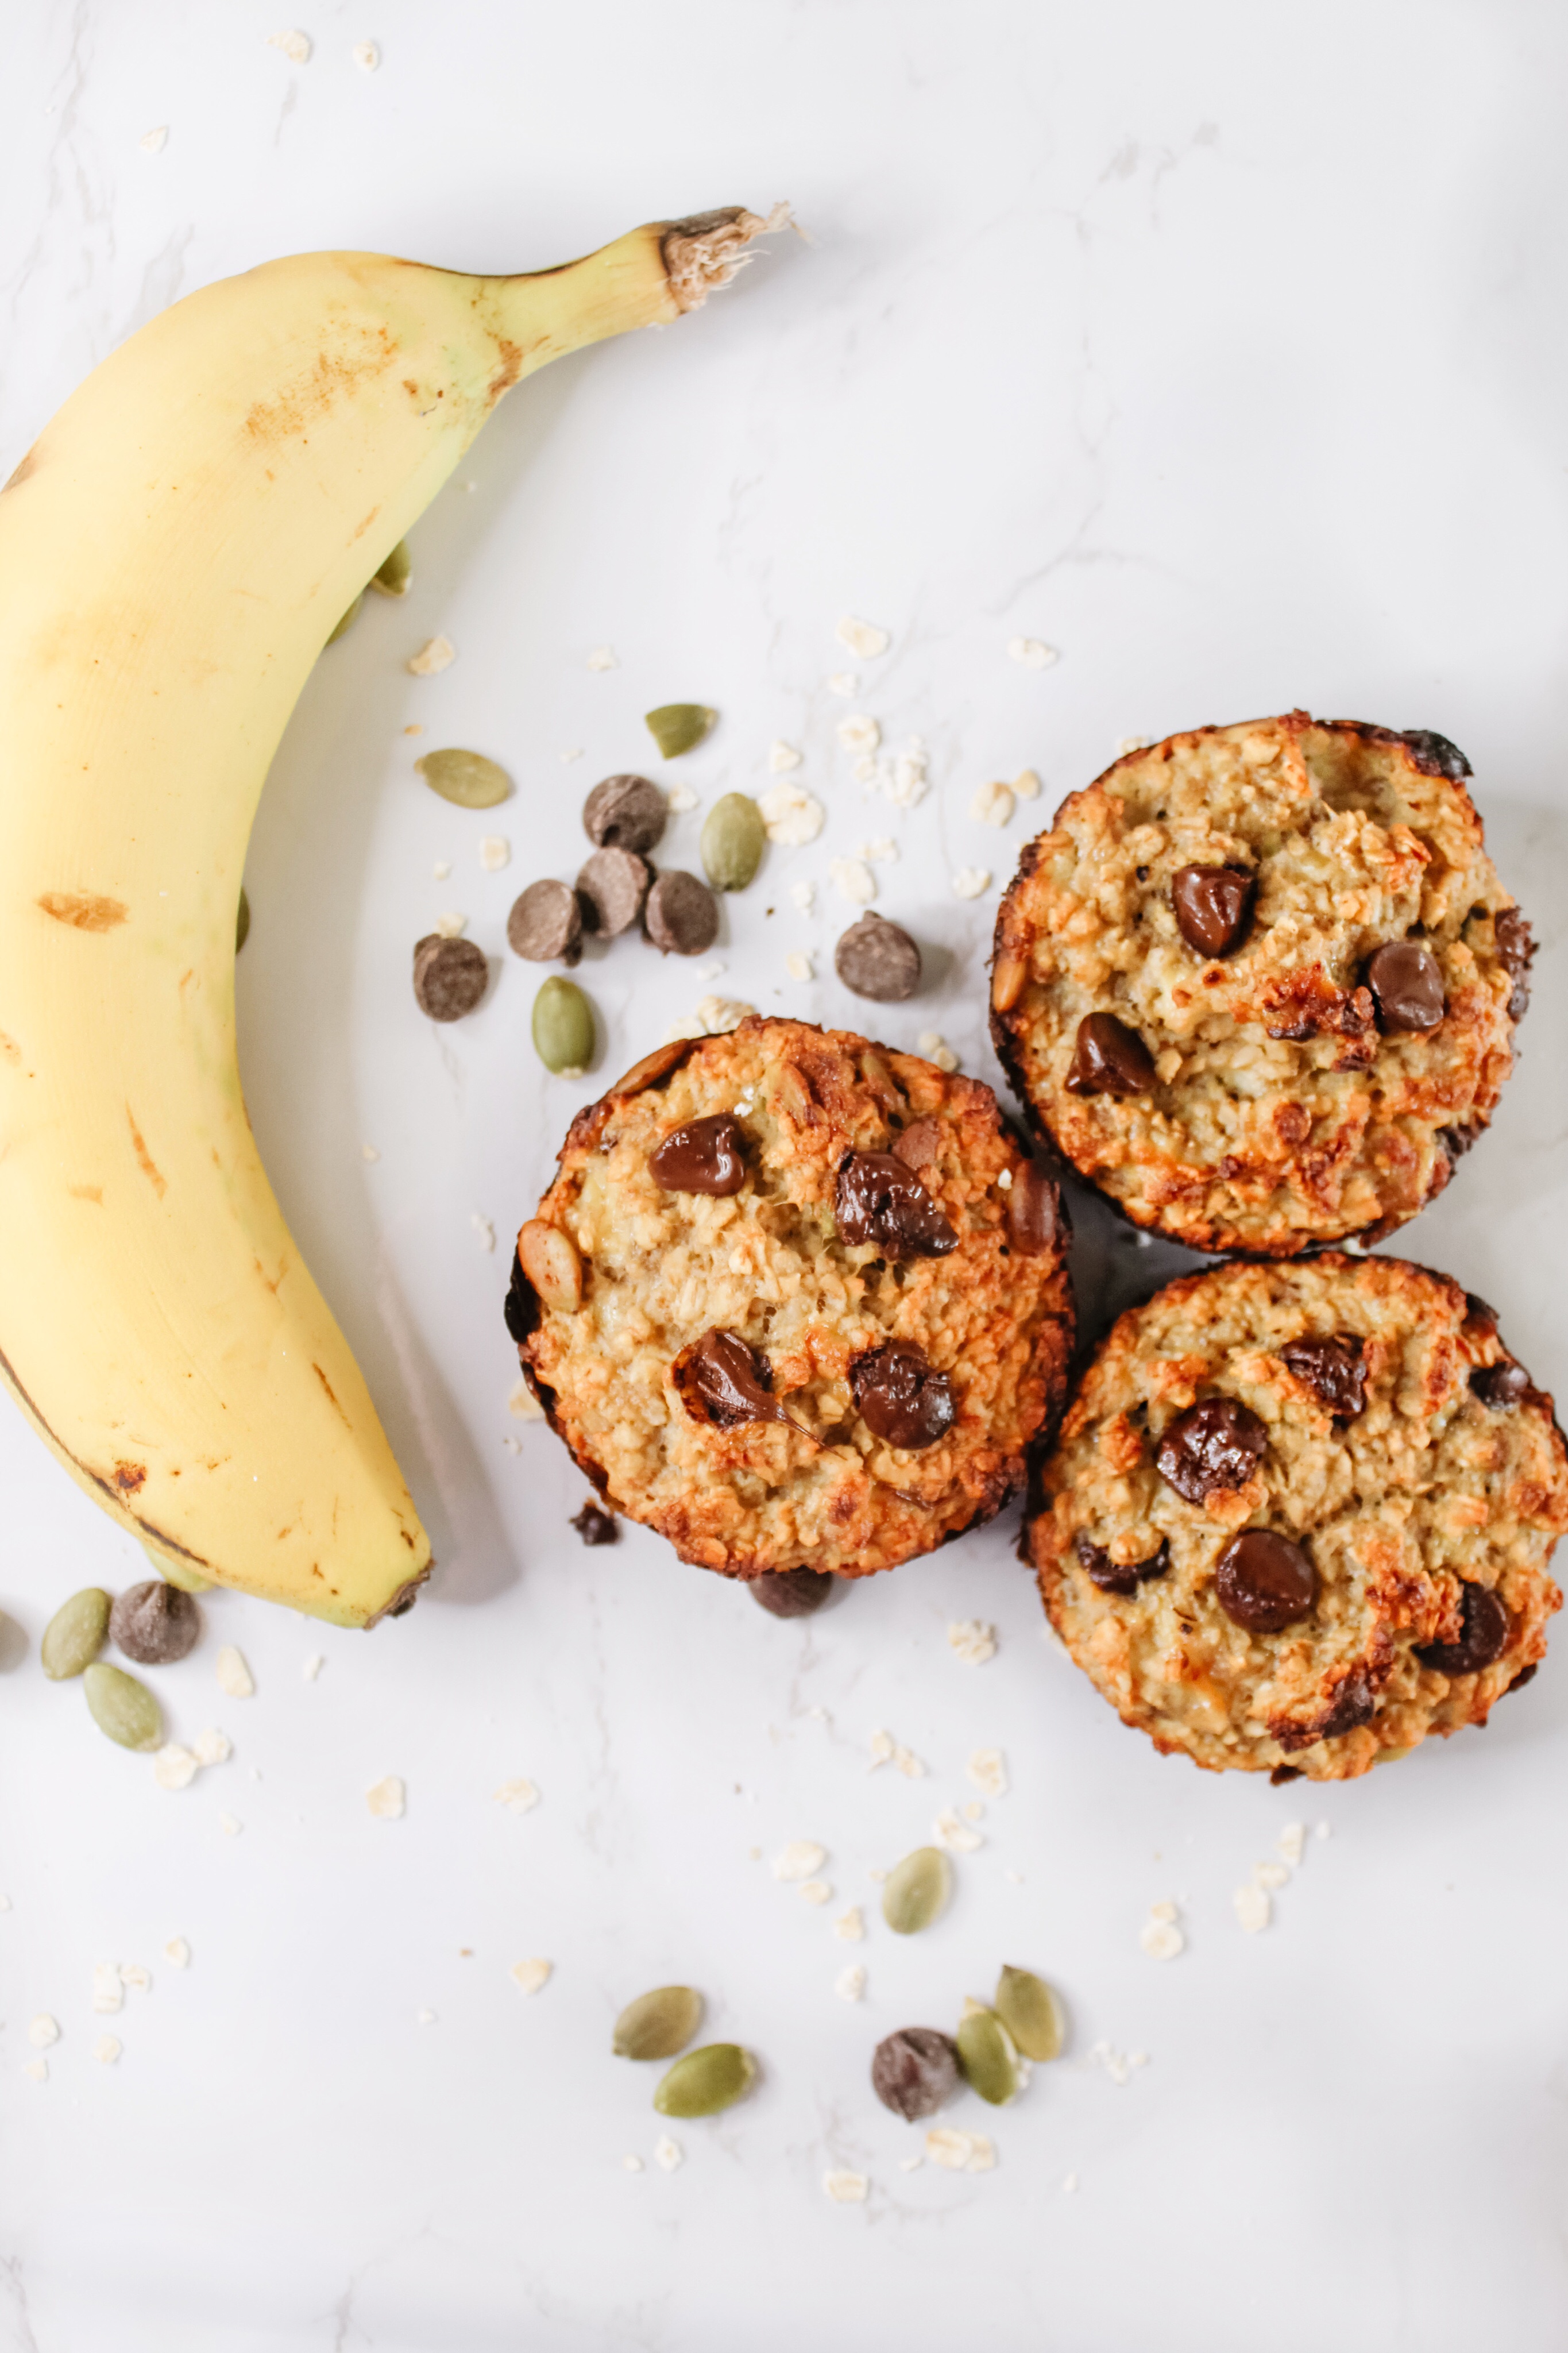 healthy banana oat muffins - sugar free and gluten free healthy muffins are a great kid friendly snack